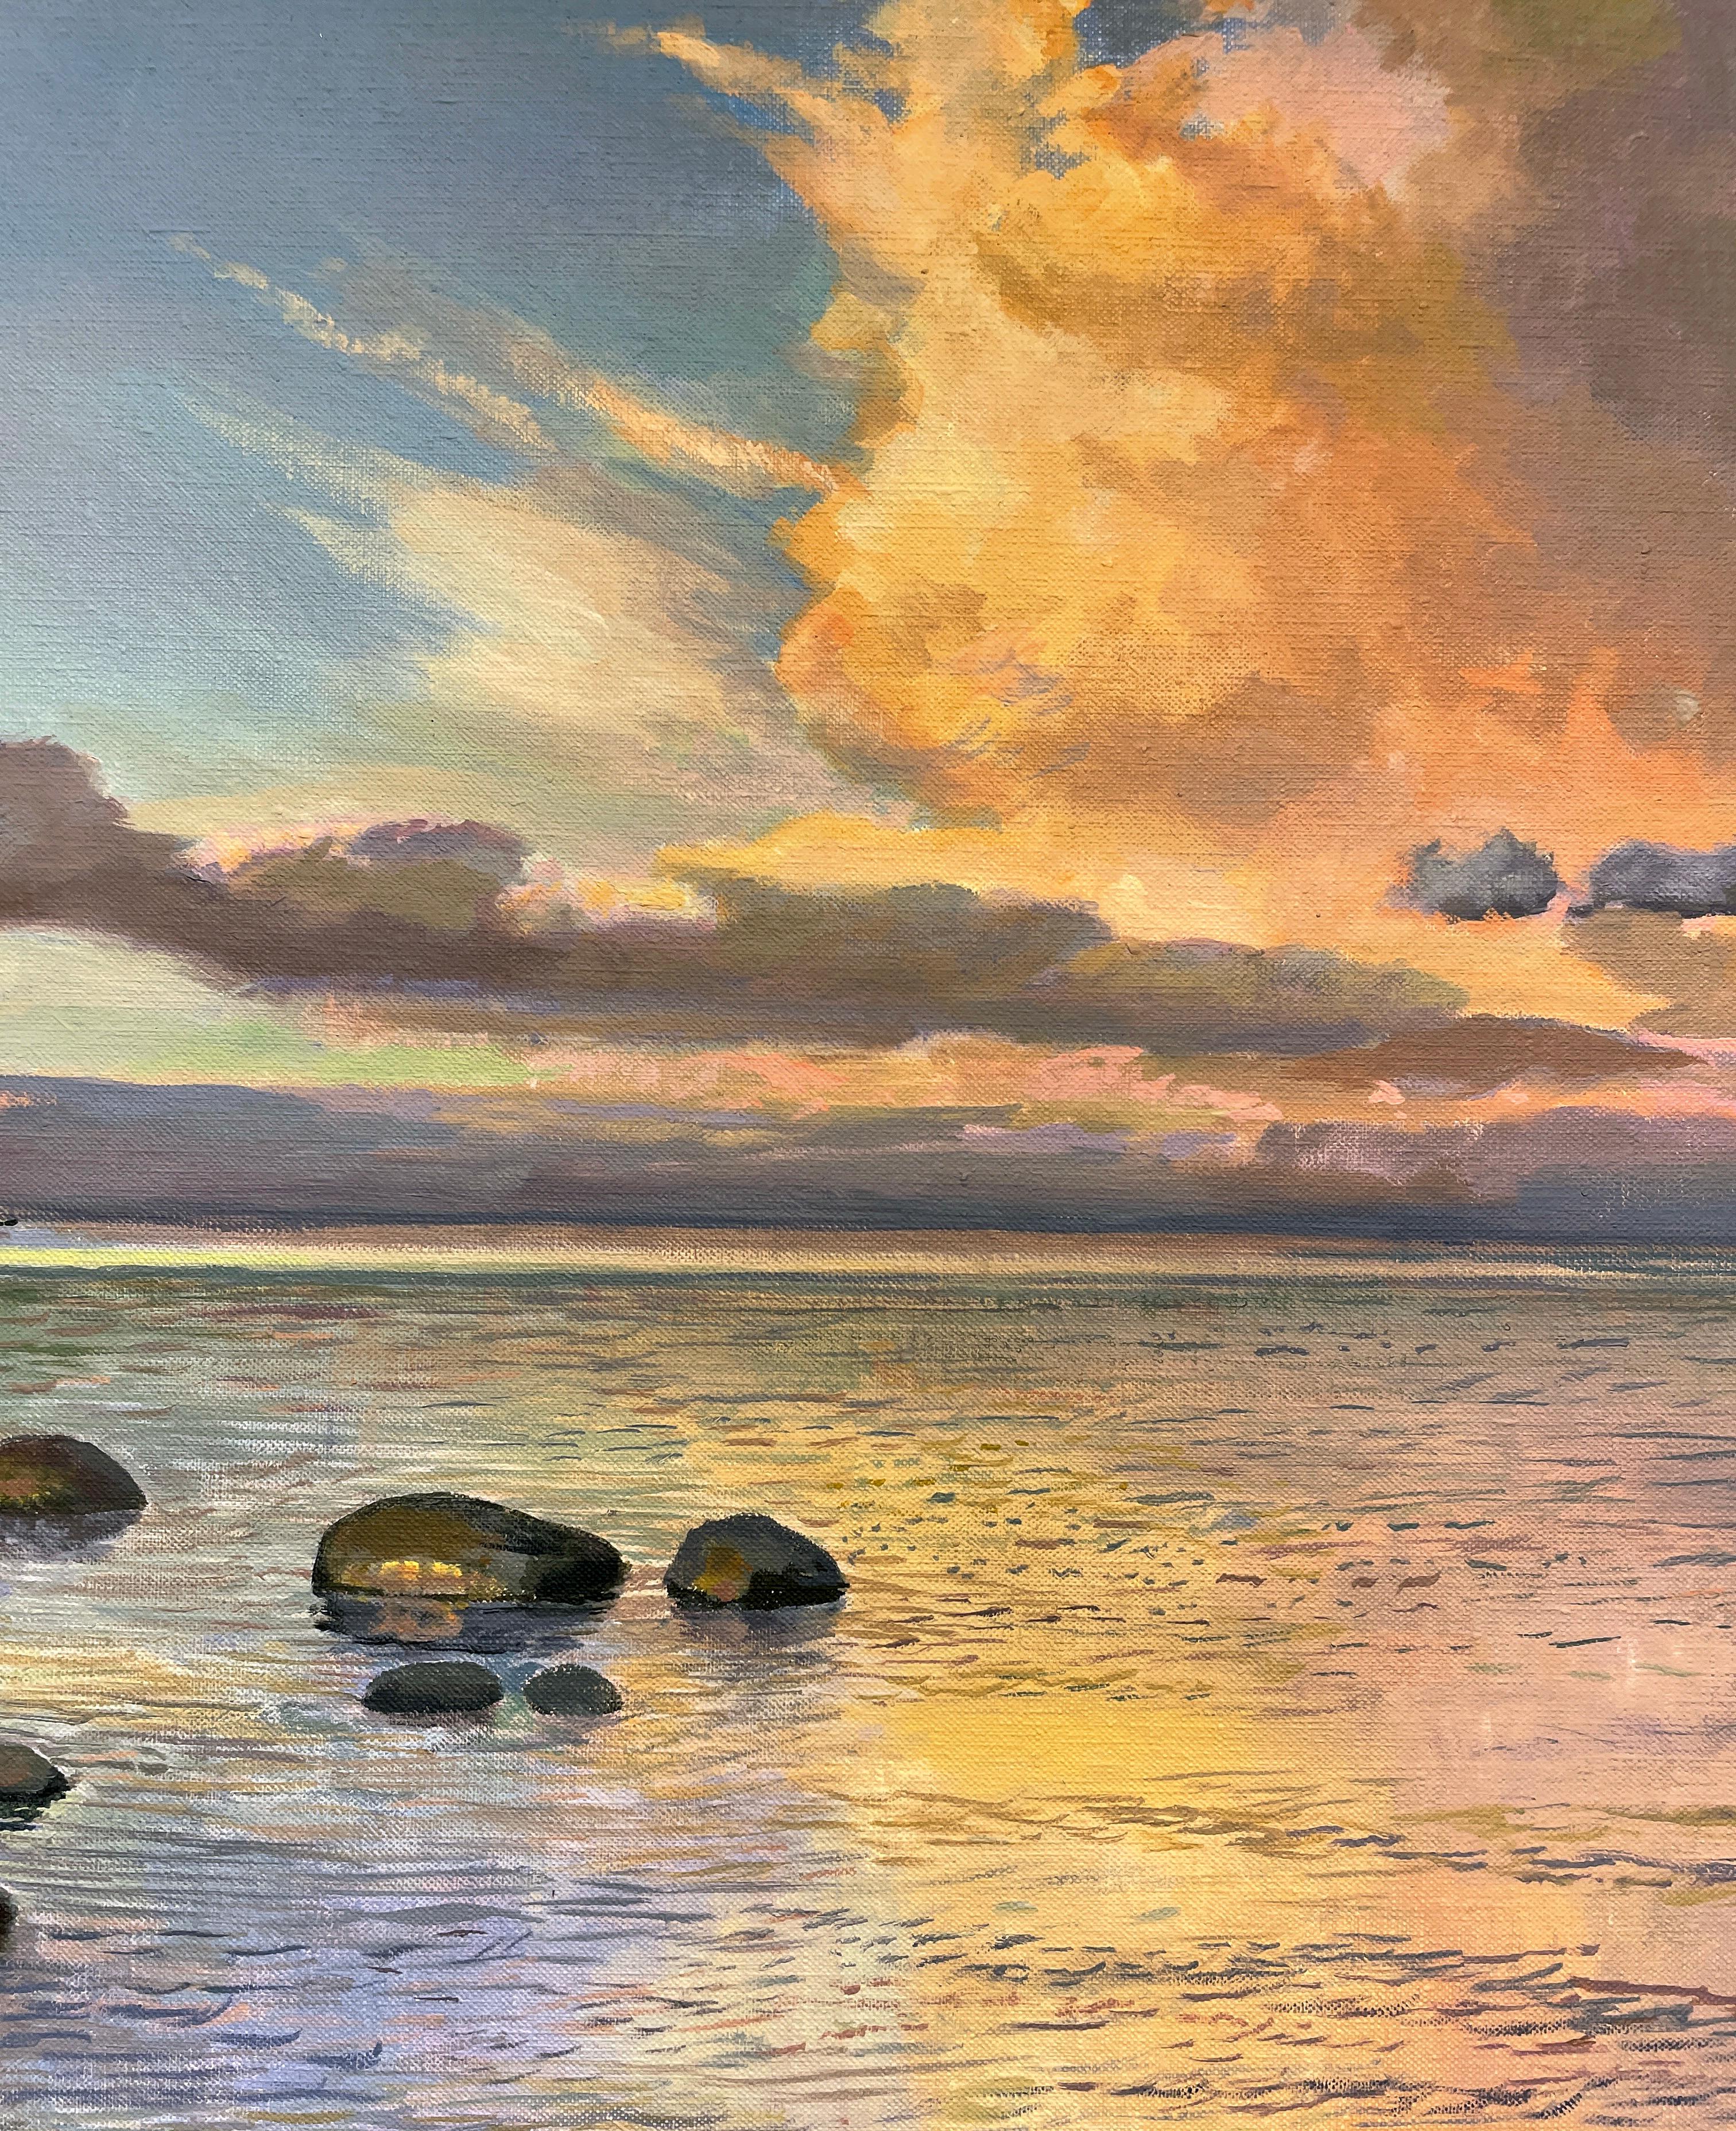 Morning on Grand Traverse Bay - Rocky Beach and Dramatic Sky, Original Oil - Contemporary Painting by Art Chartow